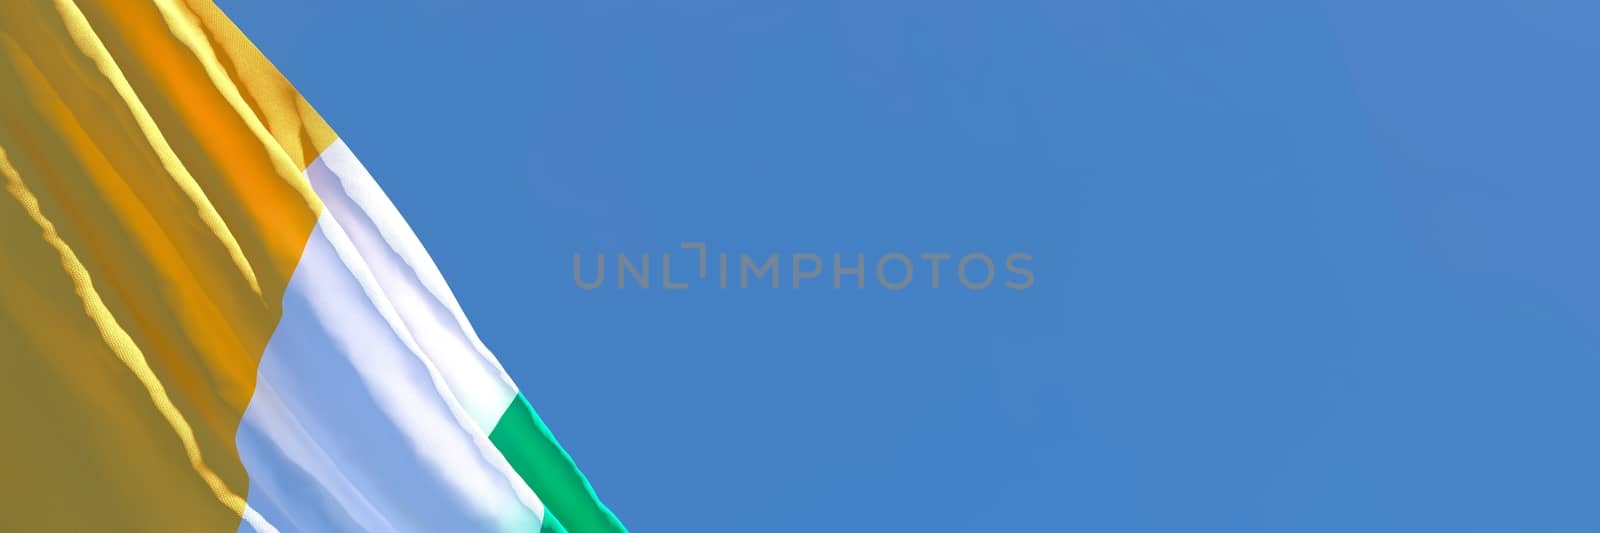 3D rendering of the national flag of Cote dIvoire waving in the wind against a blue sky